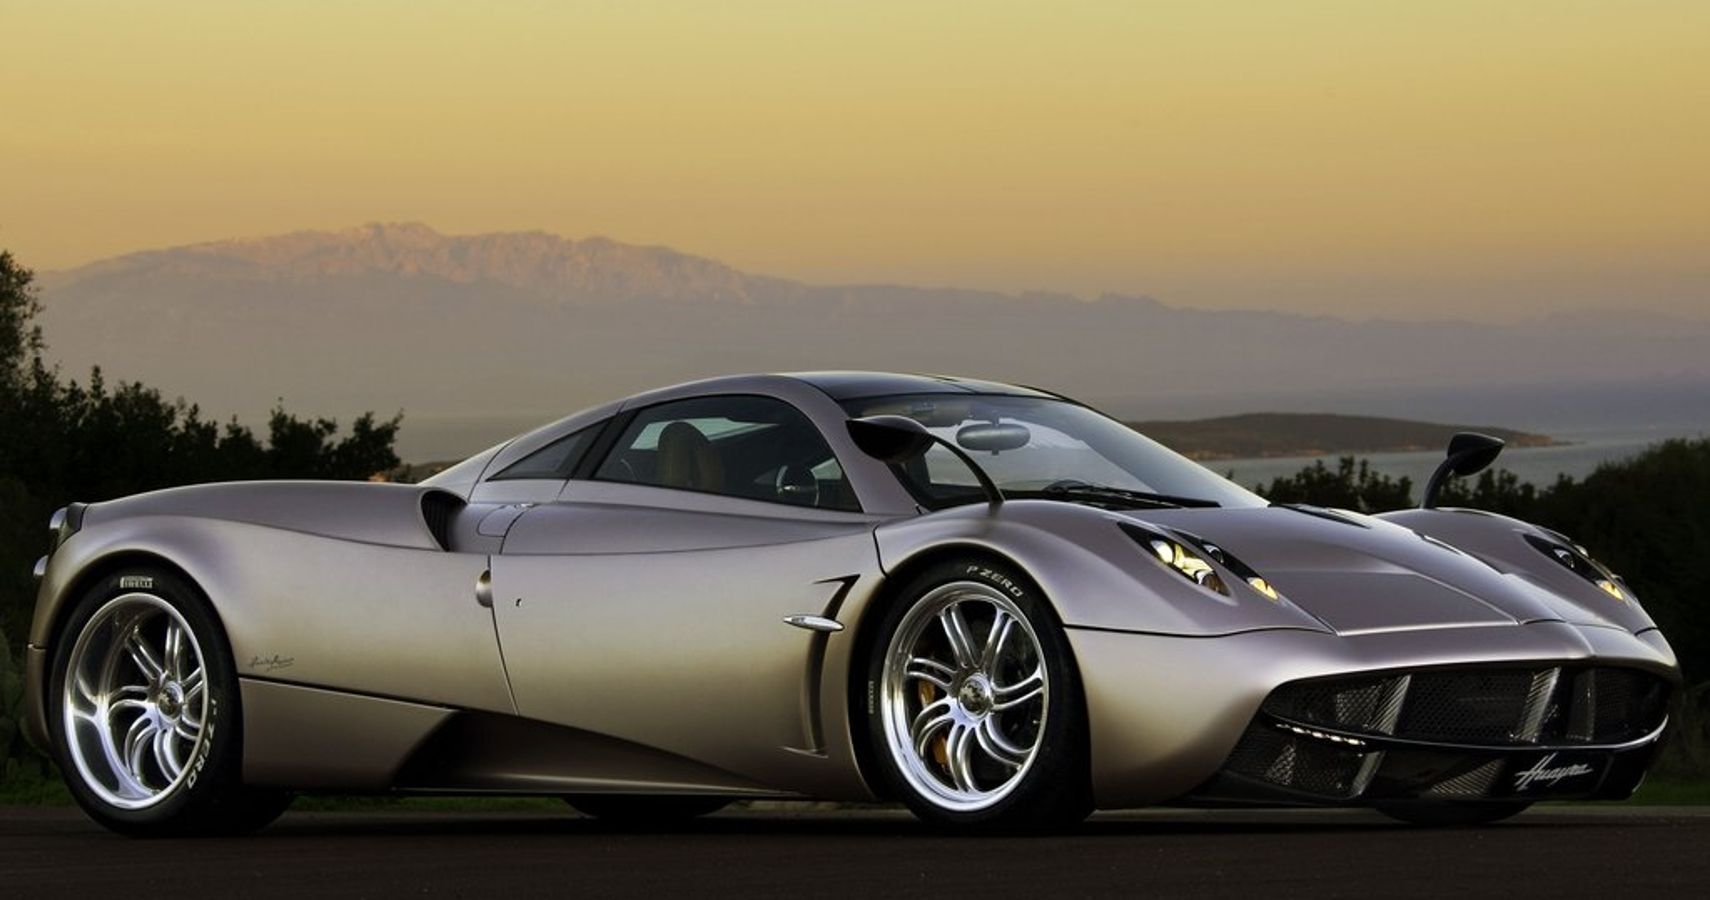 10 Of The Coolest Hypercars Of The Last 20 Years